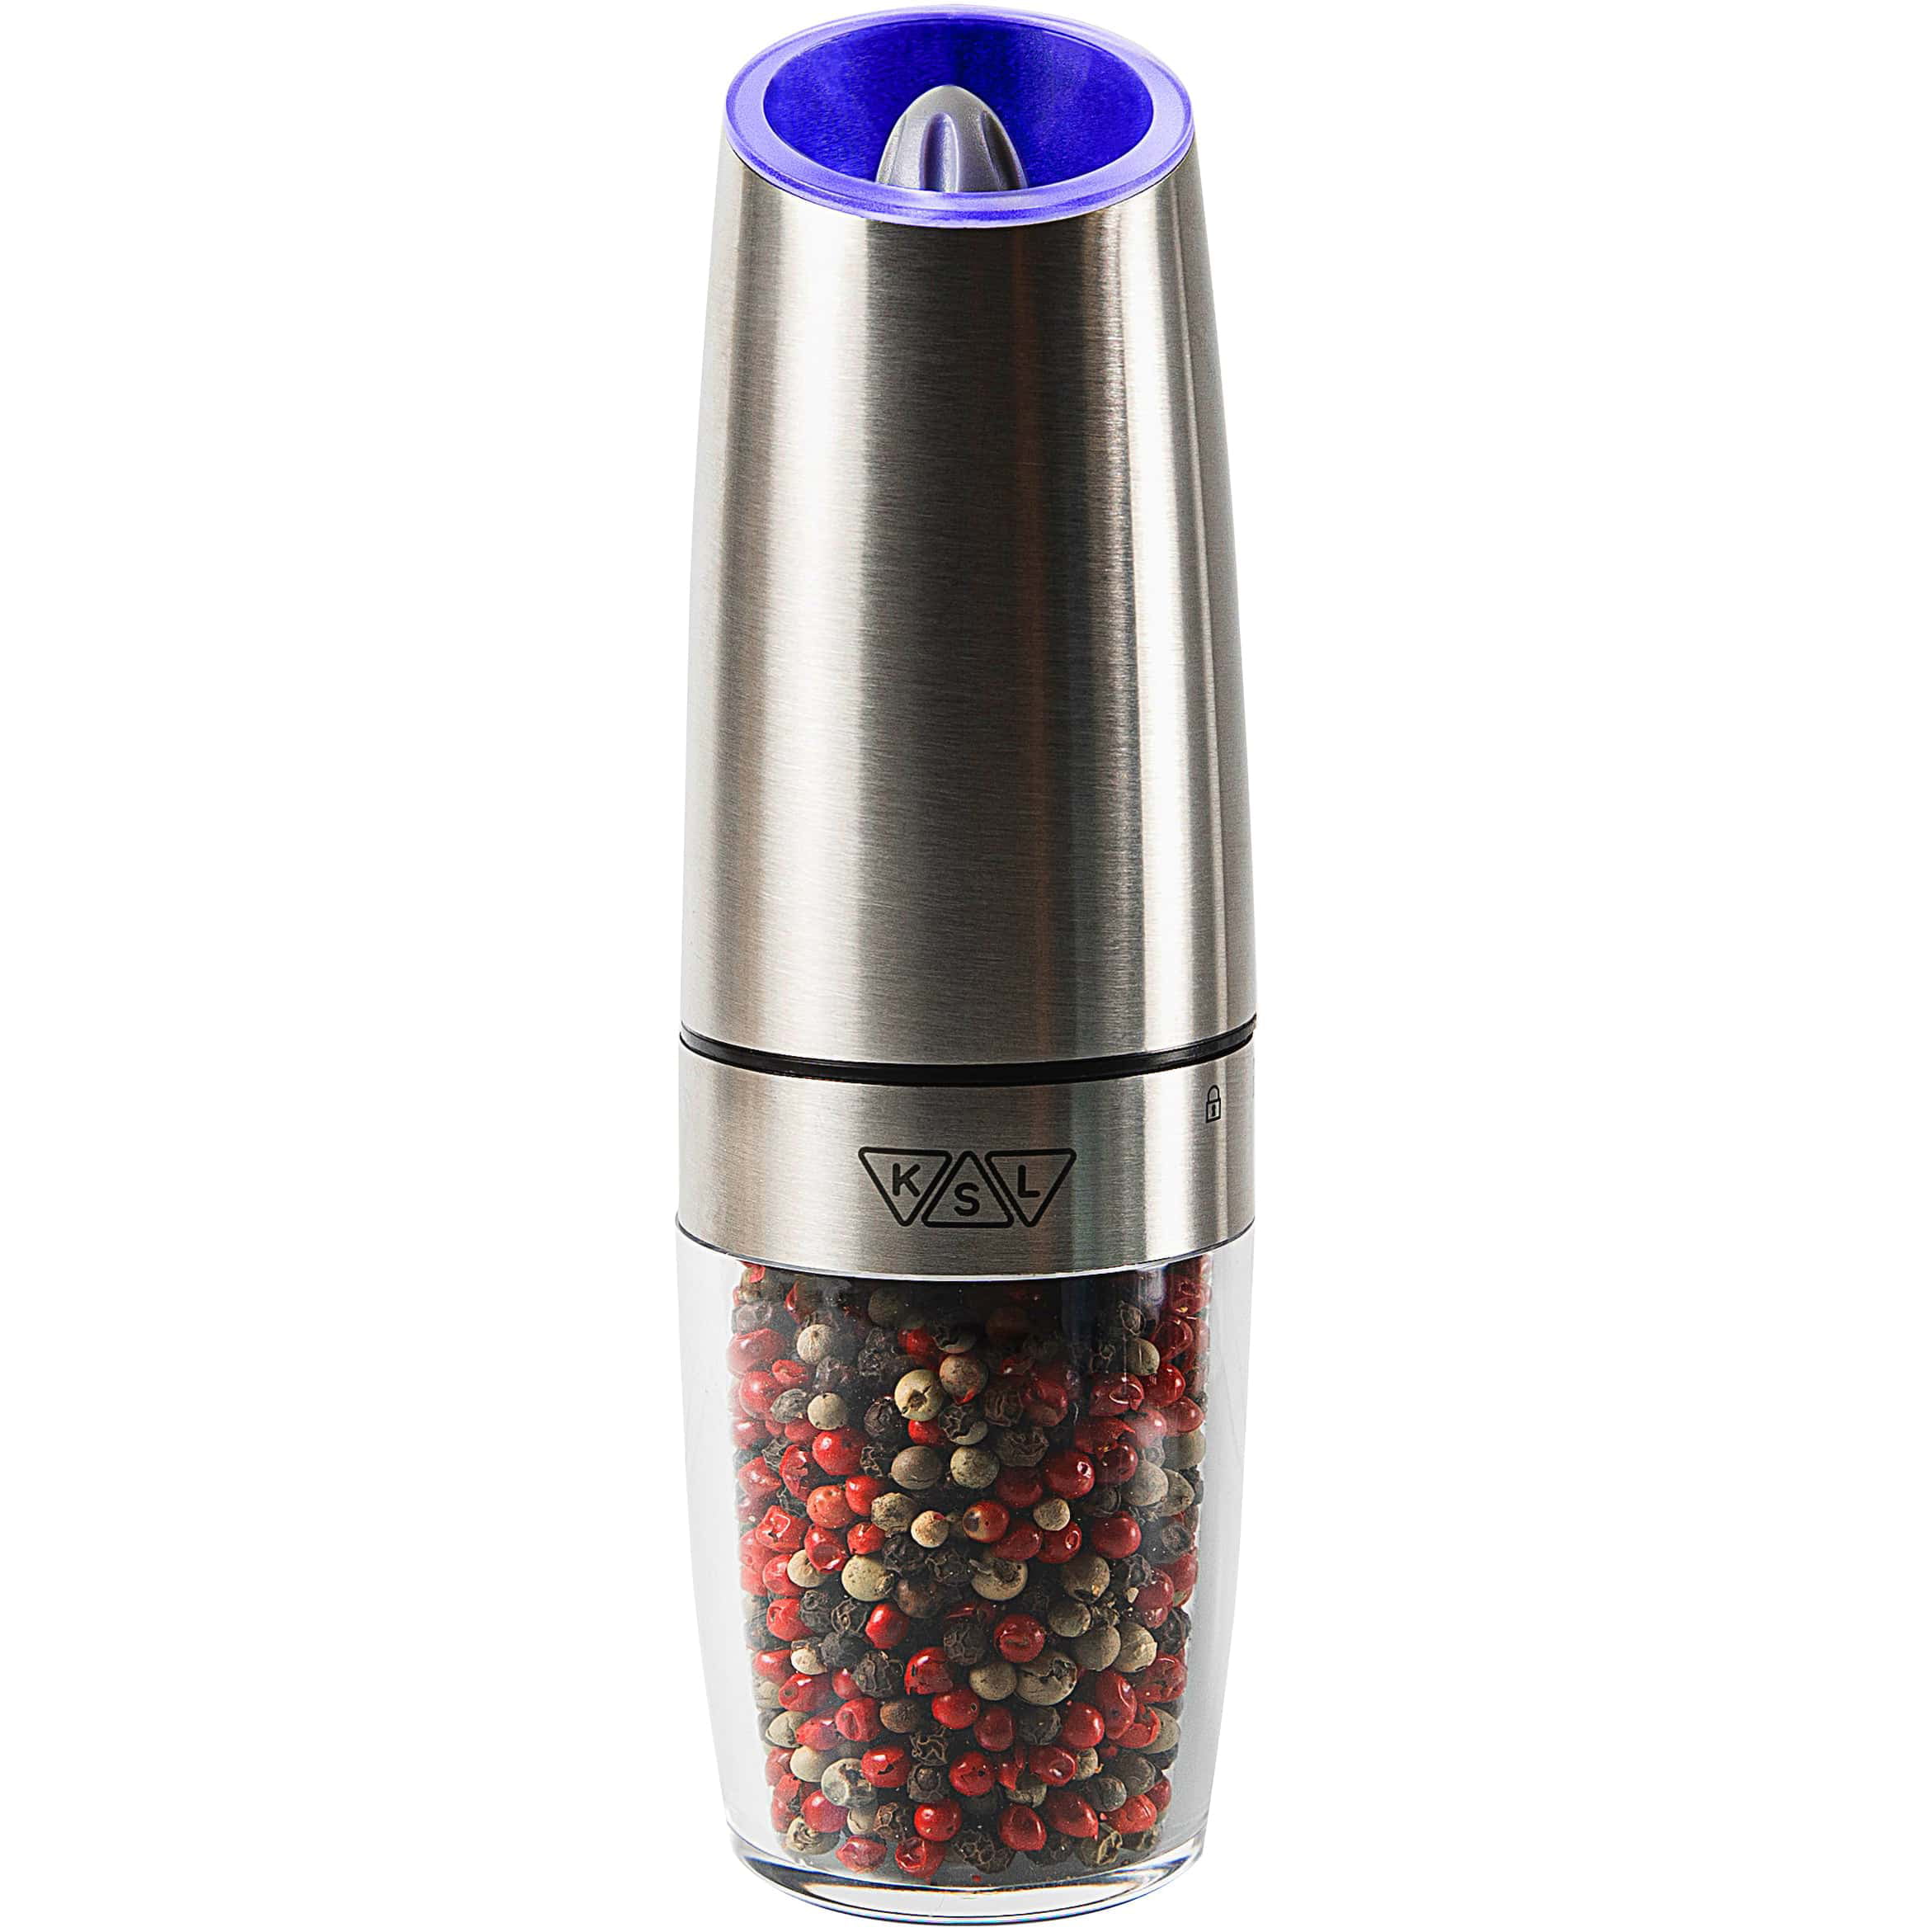 Best Buy: Kalorik Rechargeable Gravity Salt and Pepper Grinder Set  Stainless Steel PPG 45587 SS